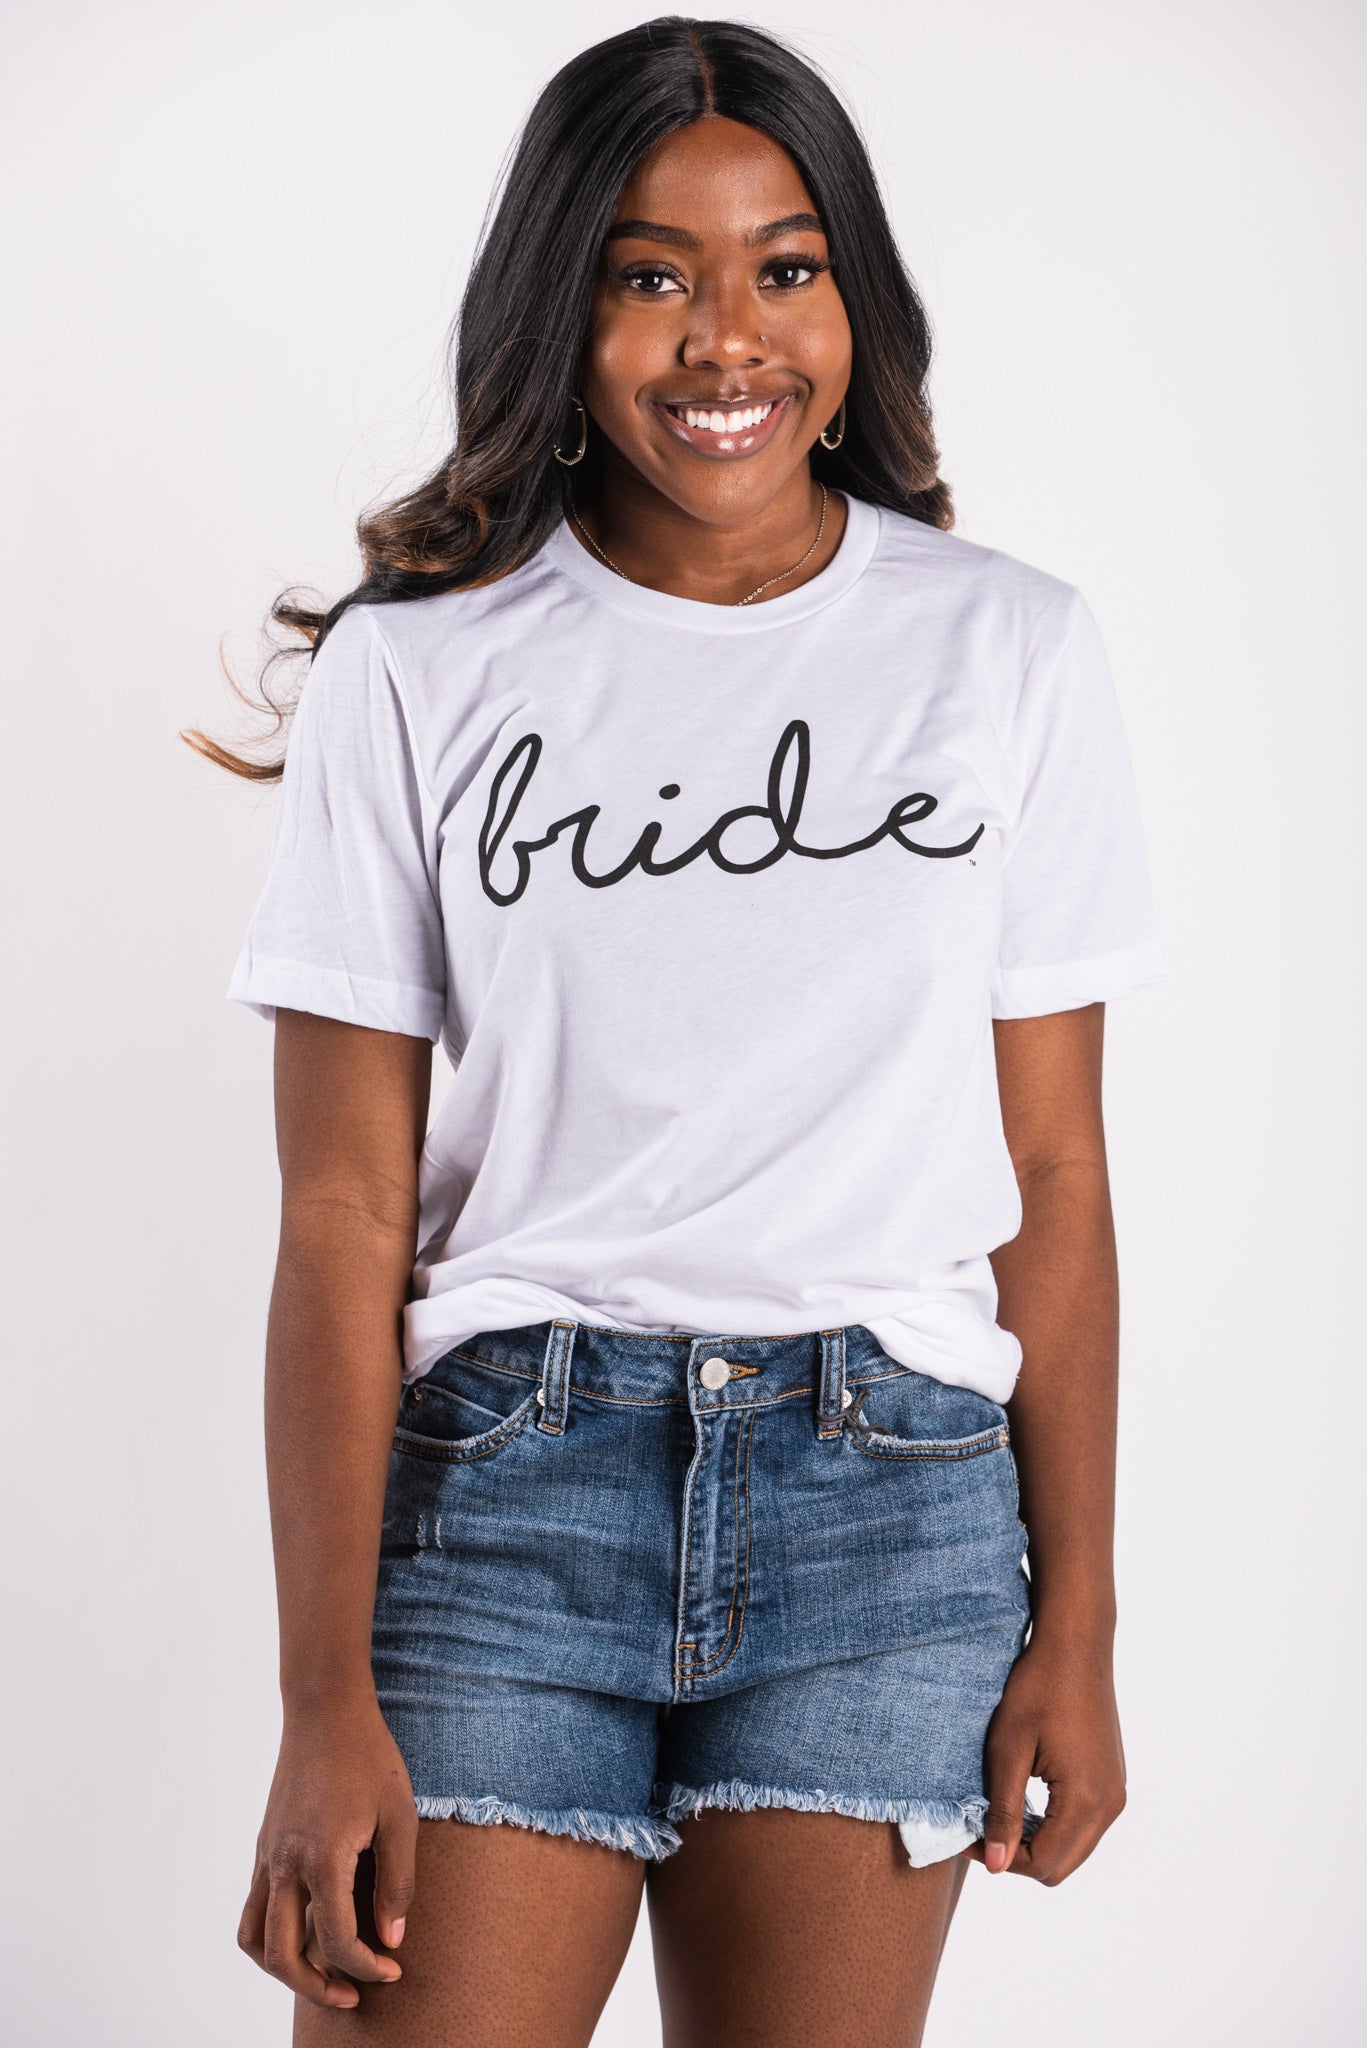 Bride pride script crew neck t-shirt white - Adorable T-shirts - Unique Tank Tops and Graphic Tees at Lush Fashion Lounge Boutique in Oklahoma